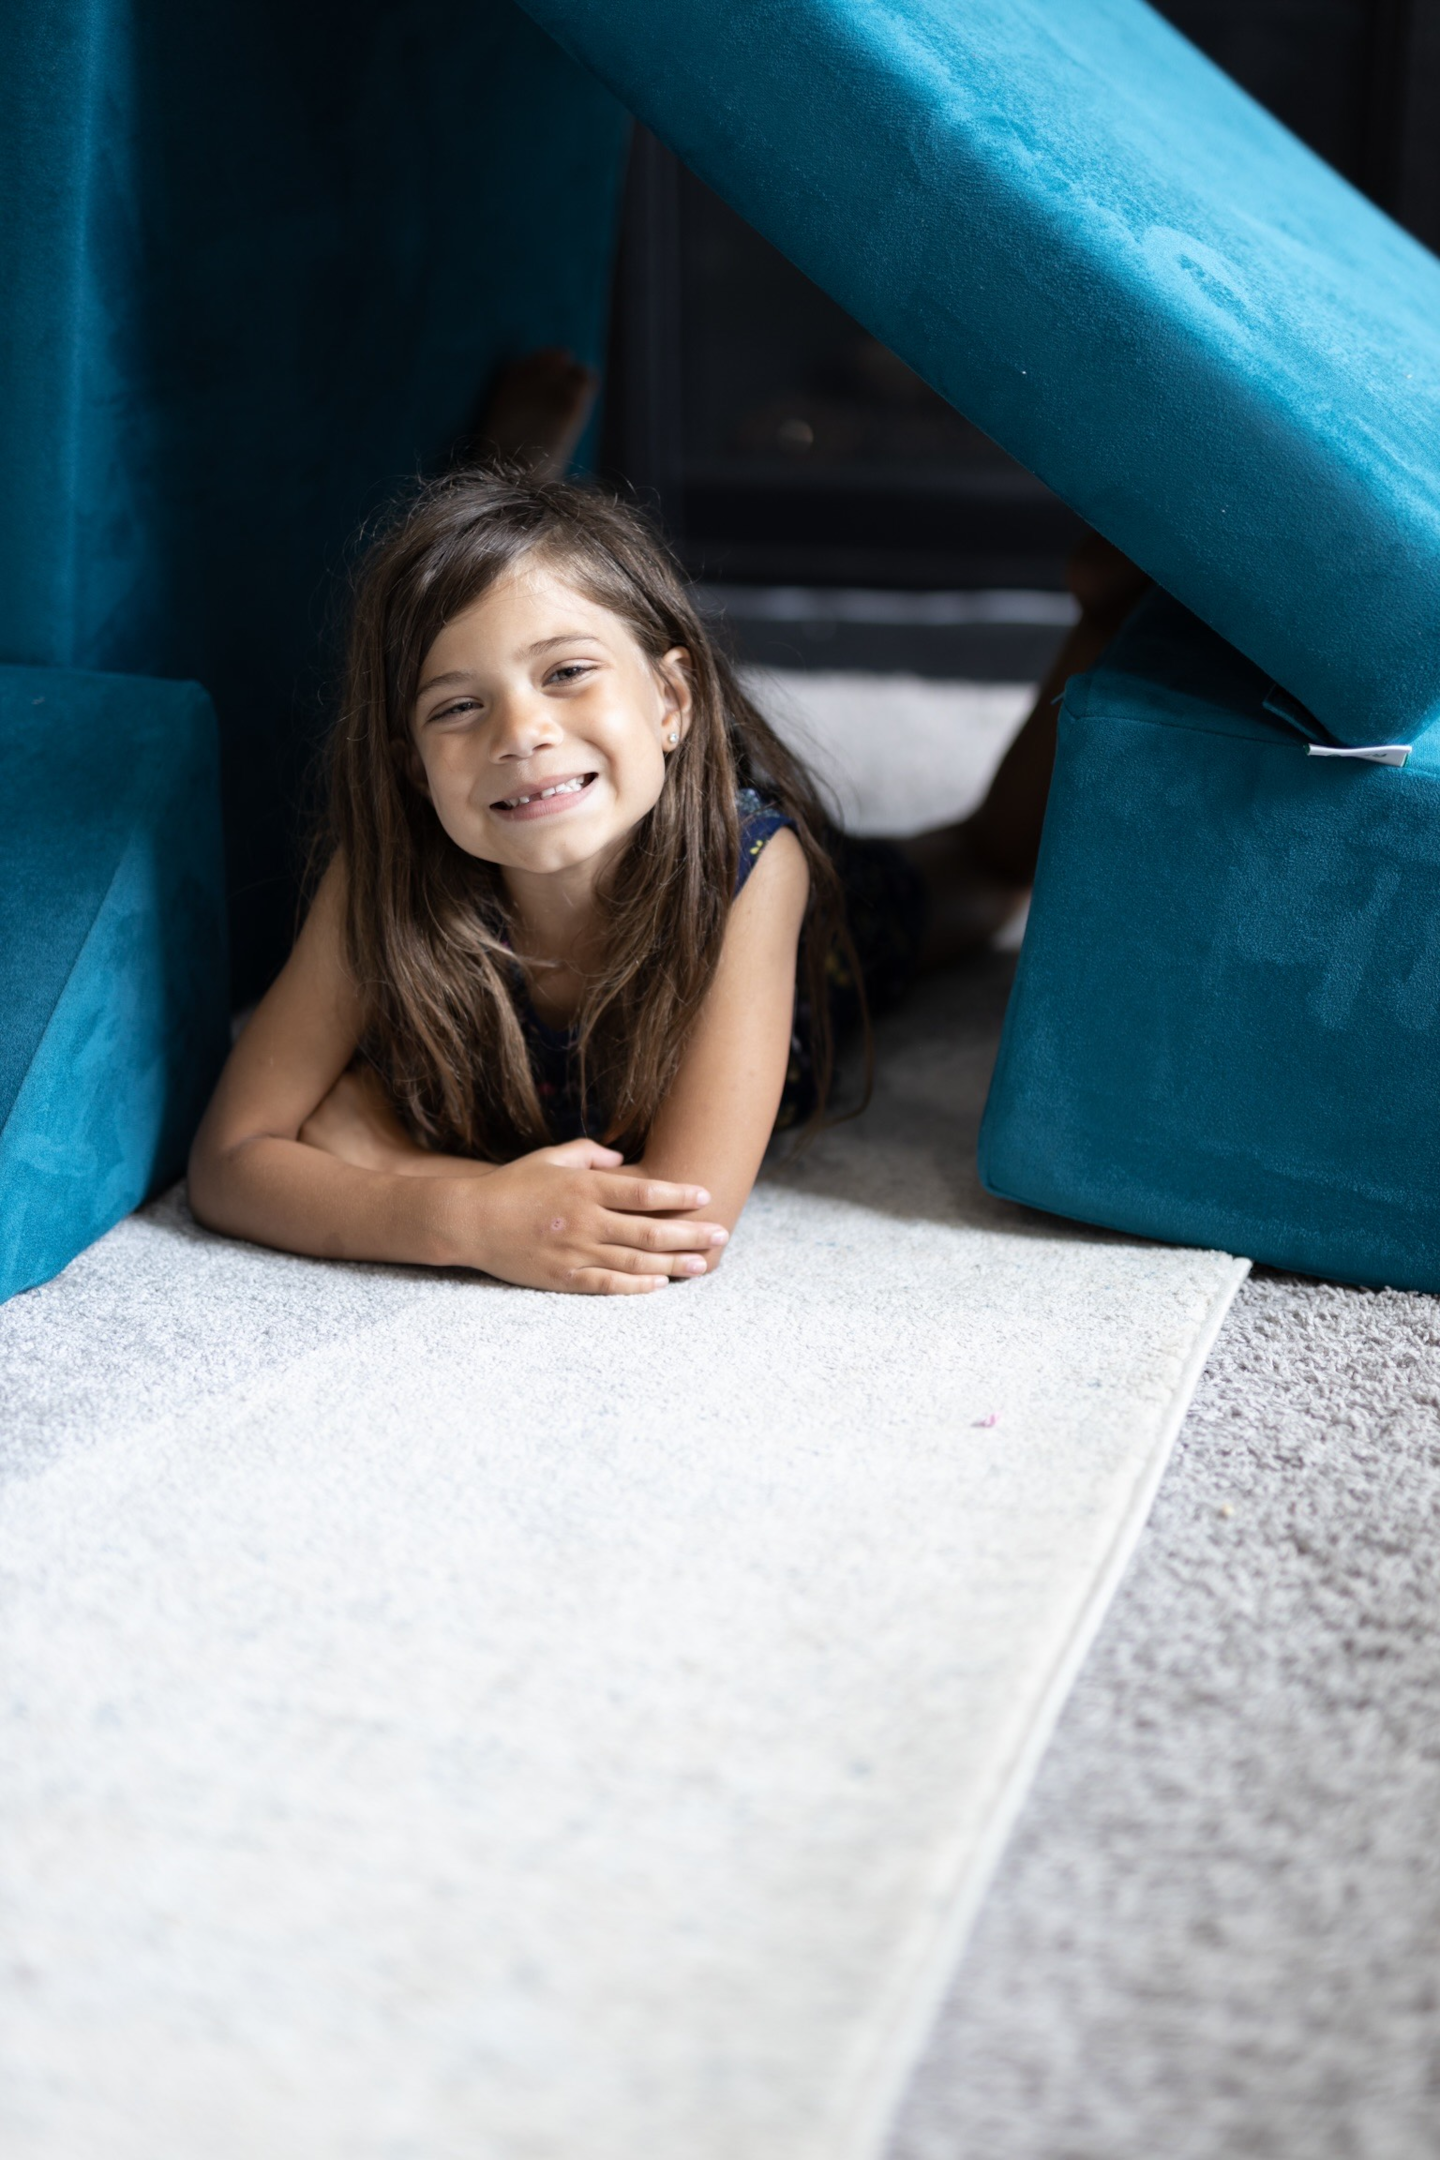 Children engaged in imaginative play on a play couch